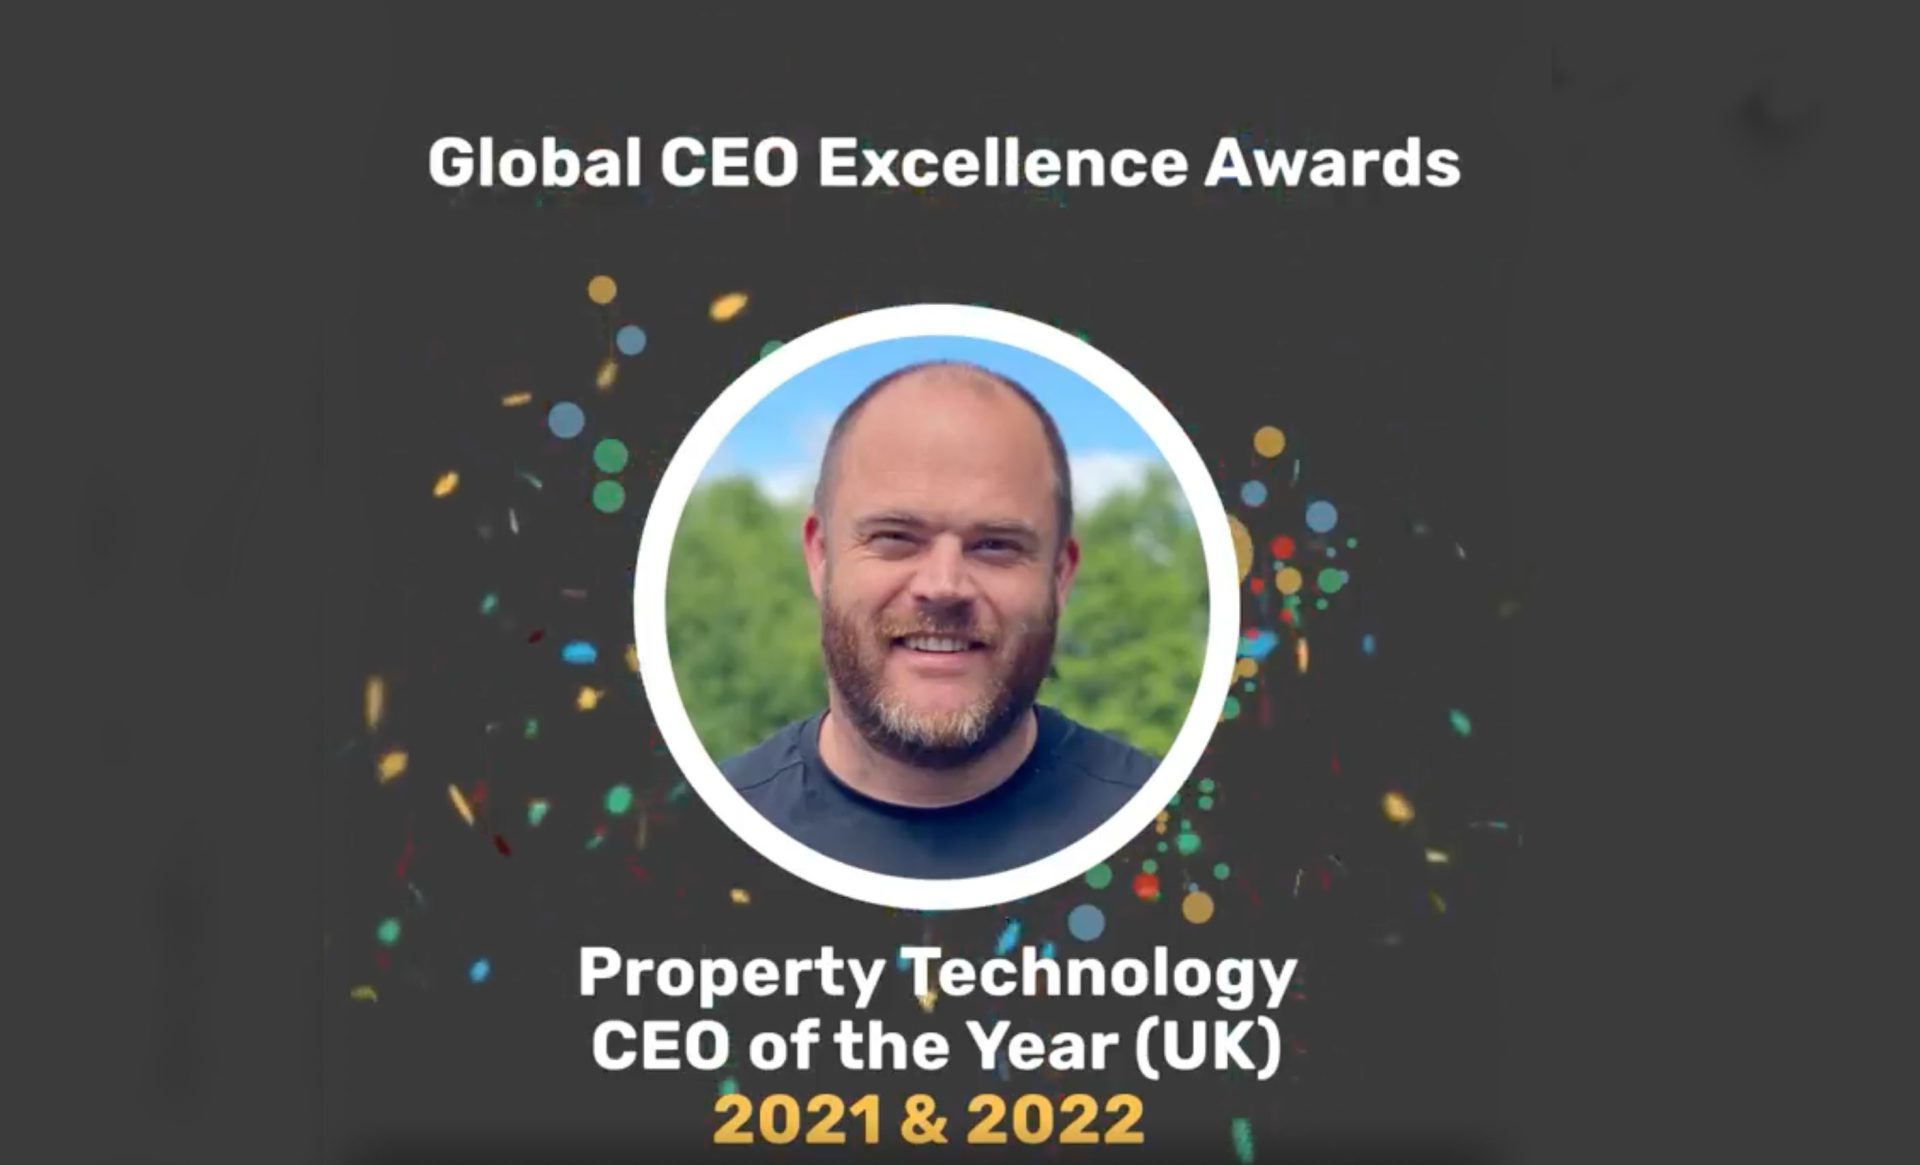 Ryan Dempsey crowned Property Technology CEO of the Year (UK)